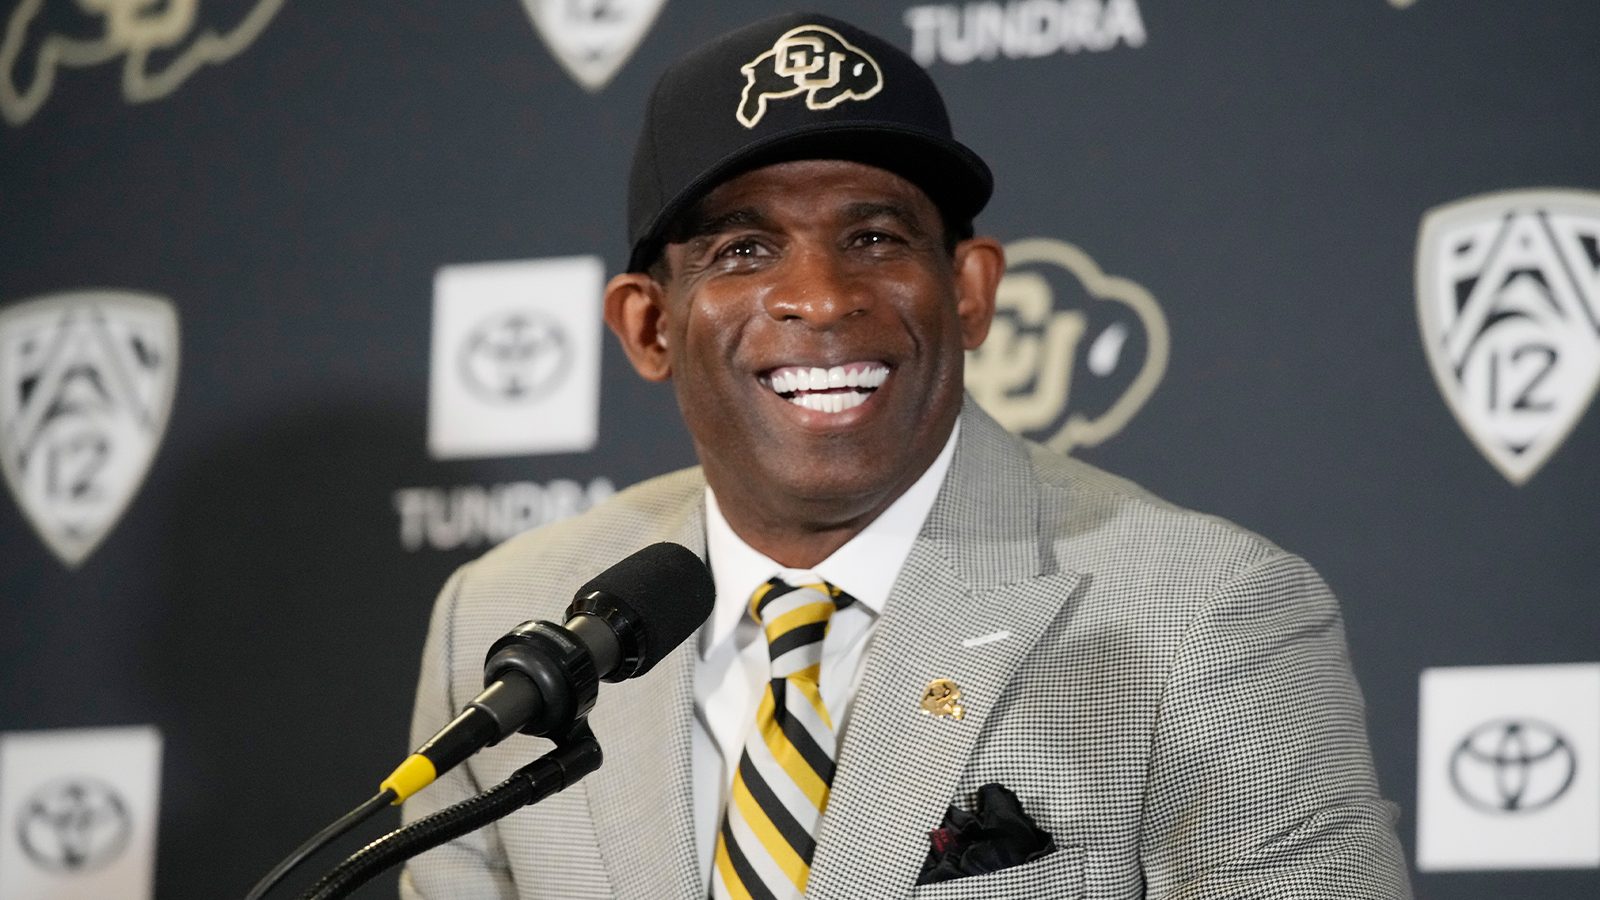 Deion Sanders Faces Serious Health Problems That Could Change His Life